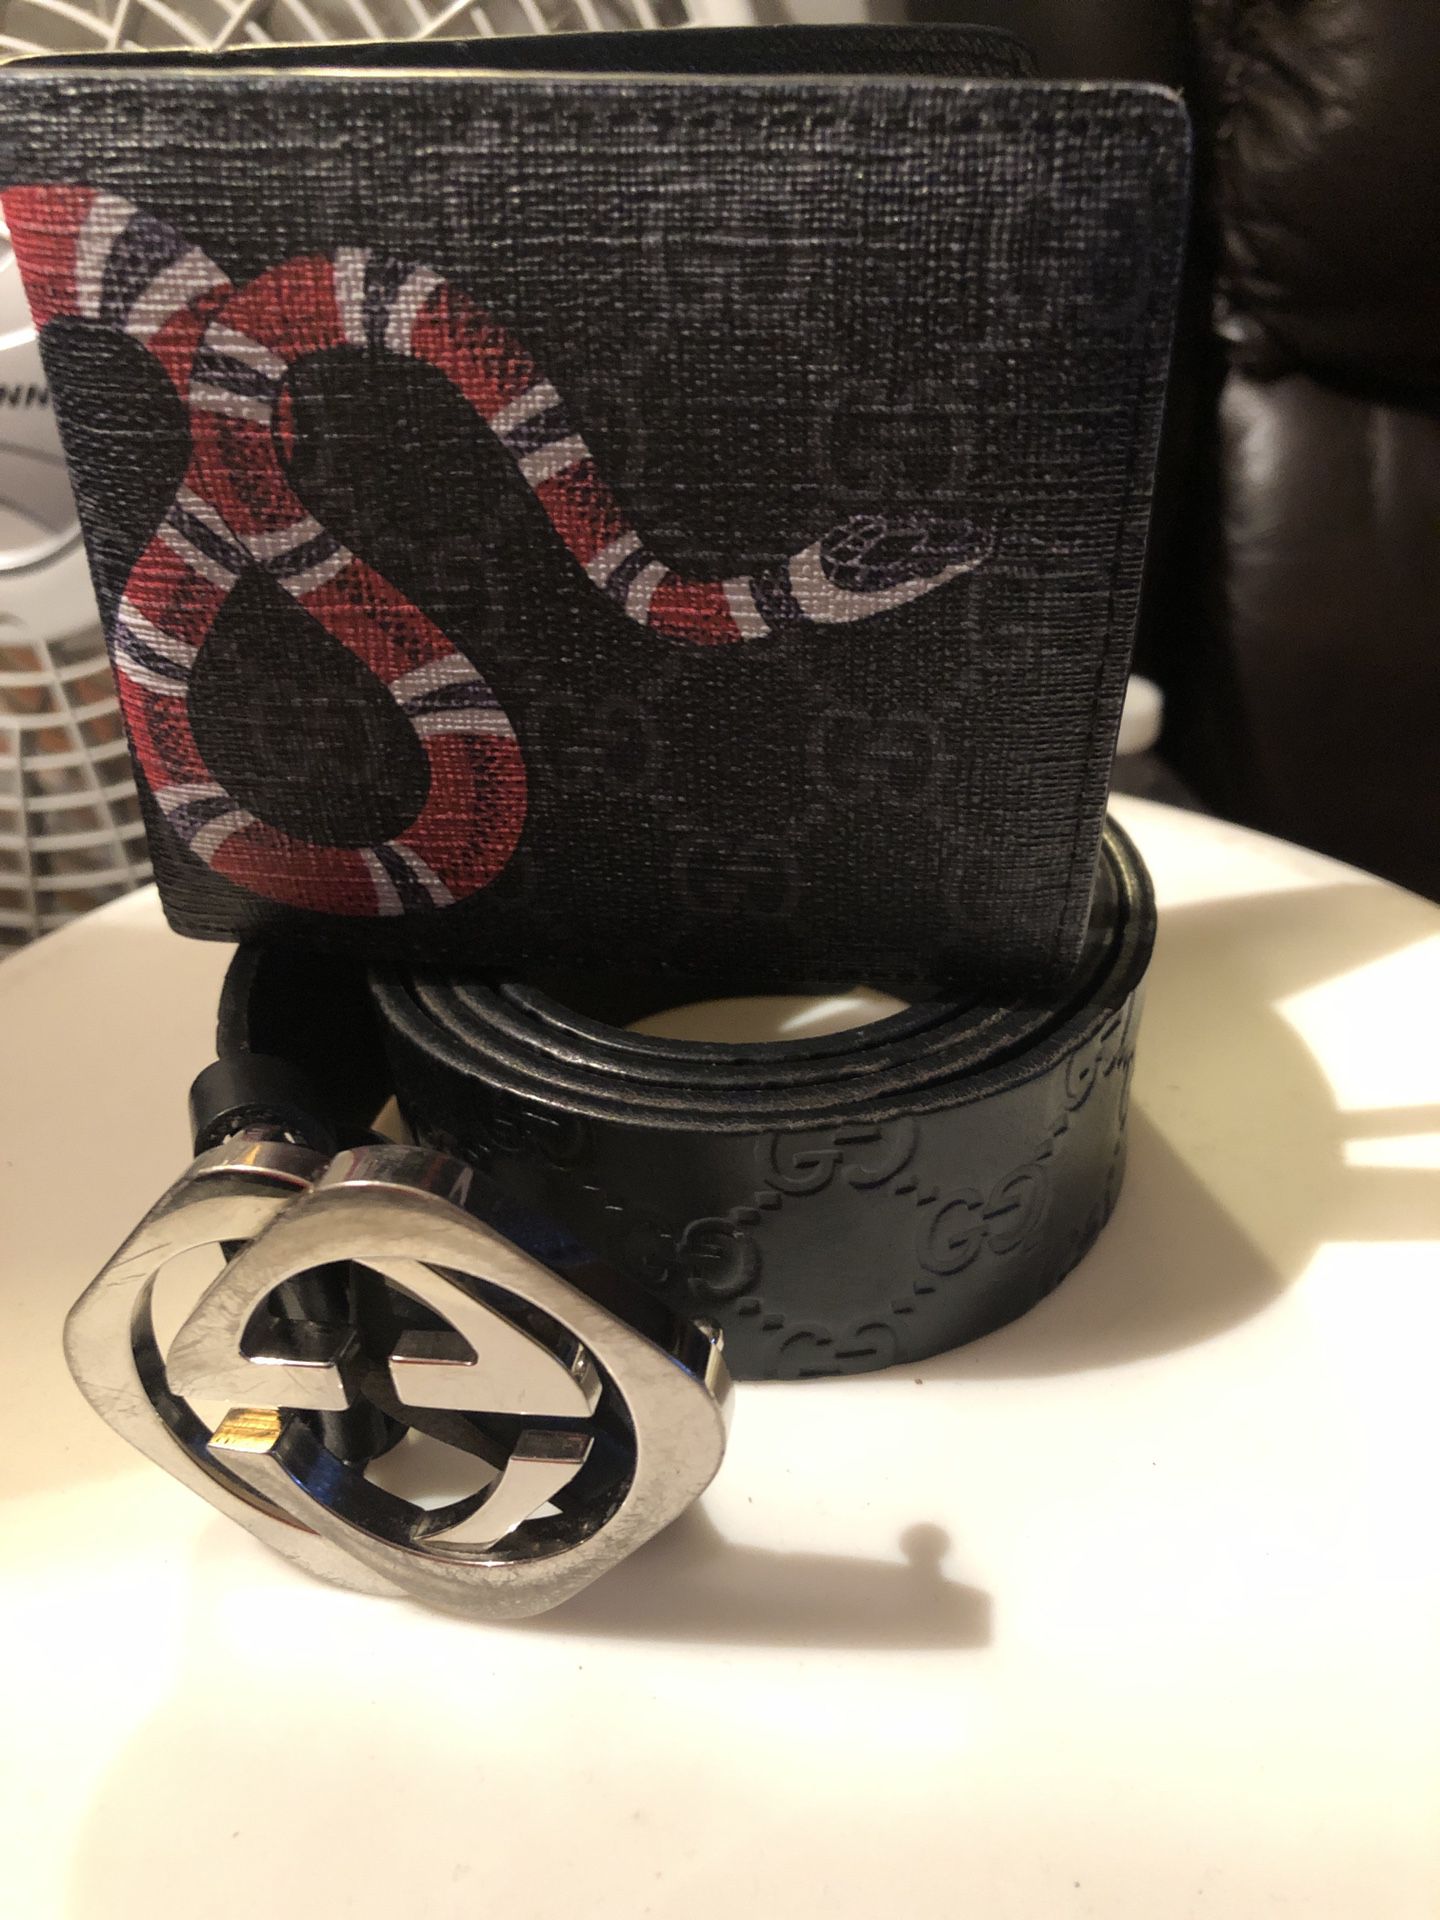 Gucci belt and wallet